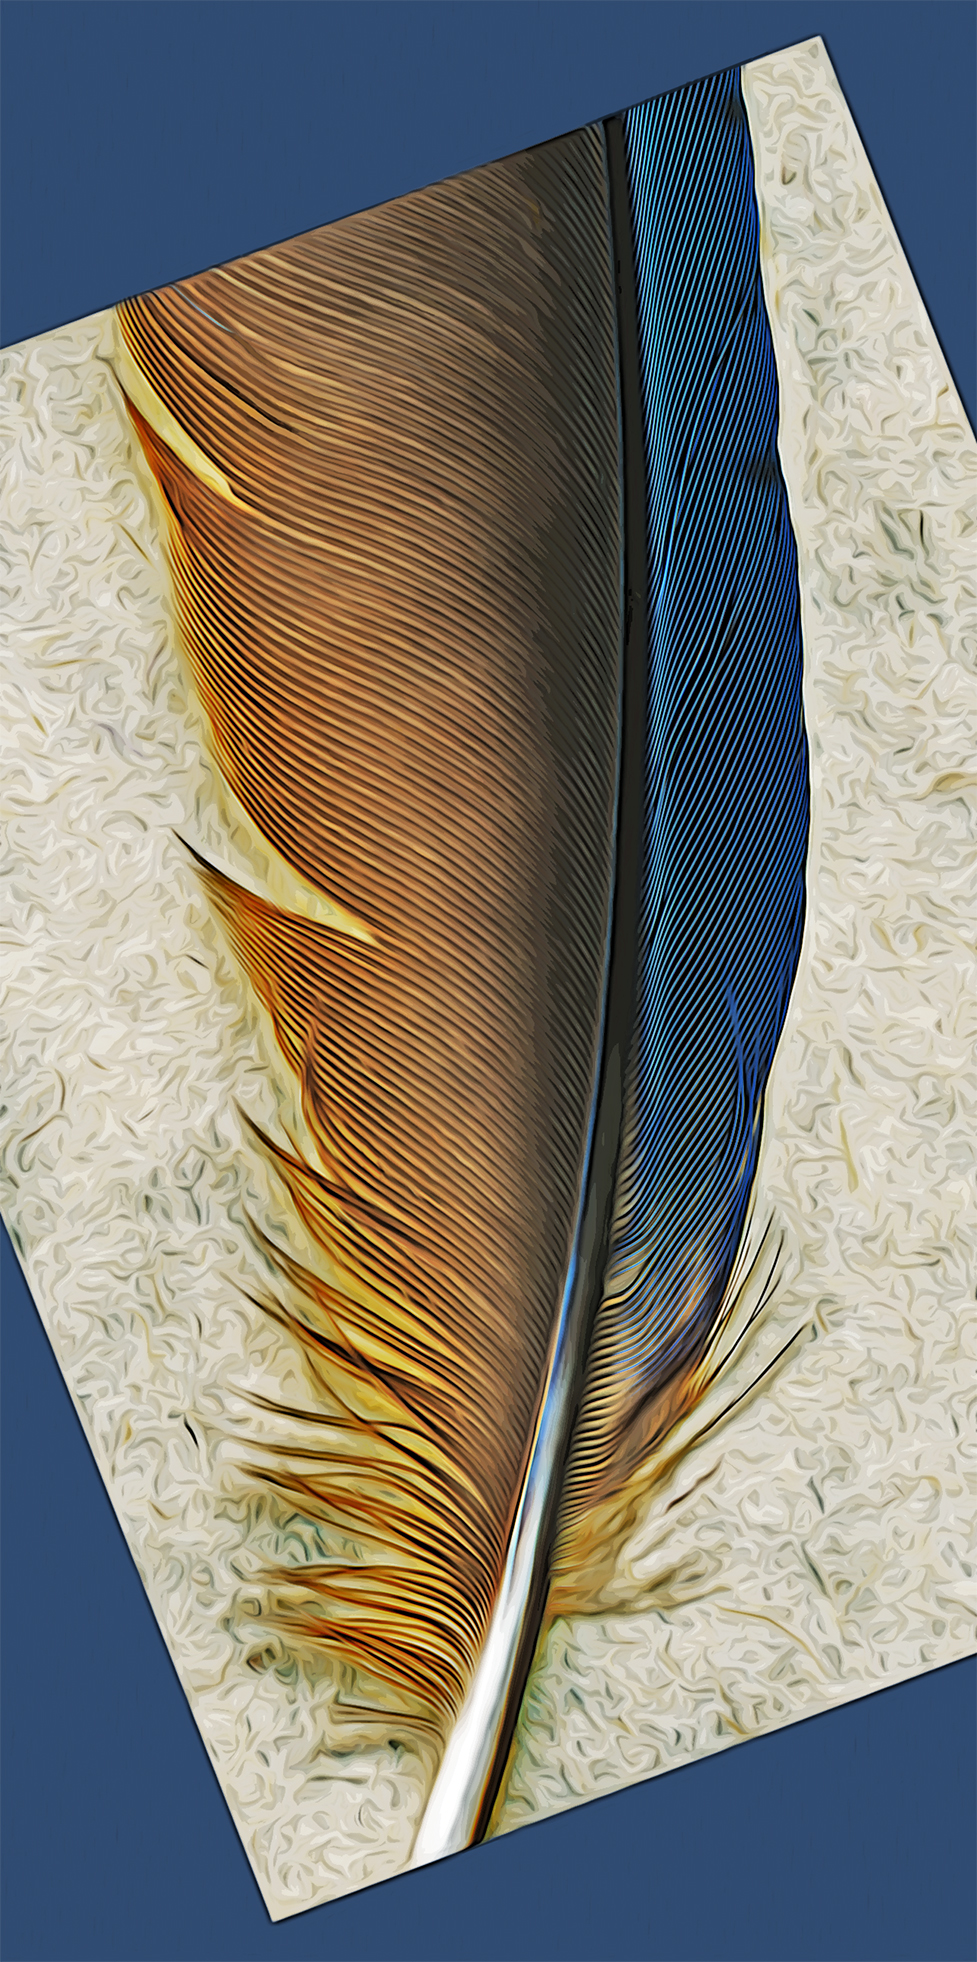 a feather of the Indigo Bunting found on the earth of 25 July 2022